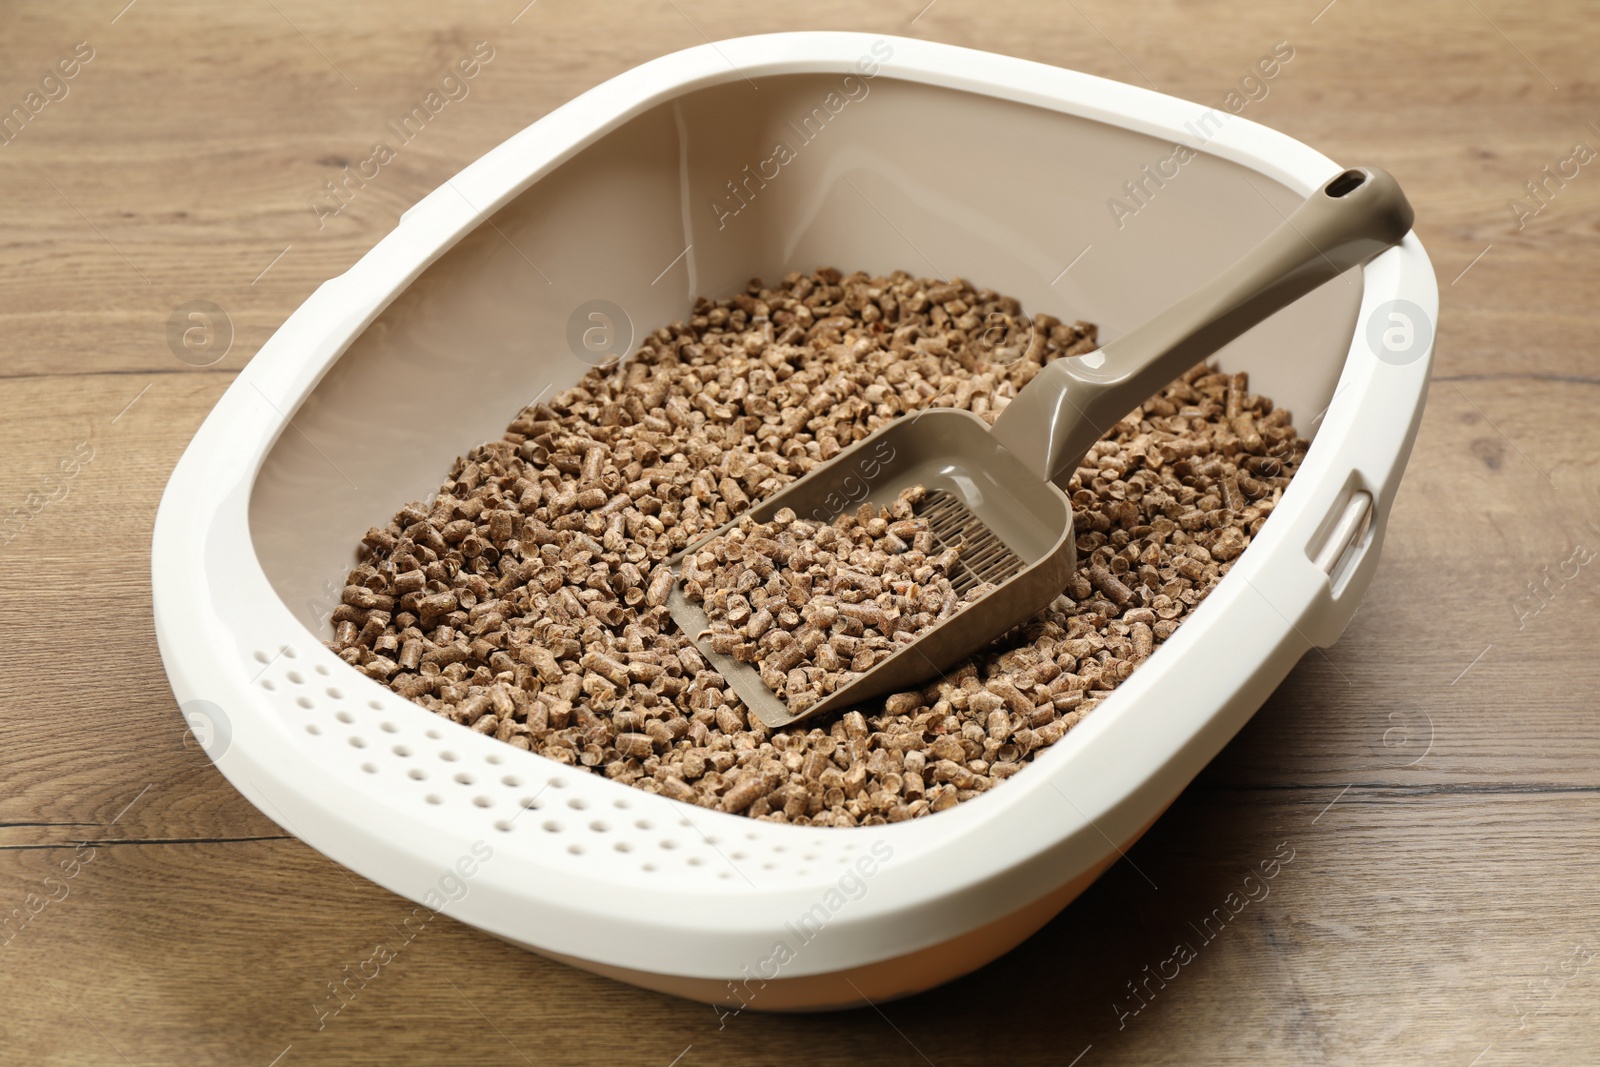 Photo of Cat litter tray with filler and scoop on wooden floor, closeup